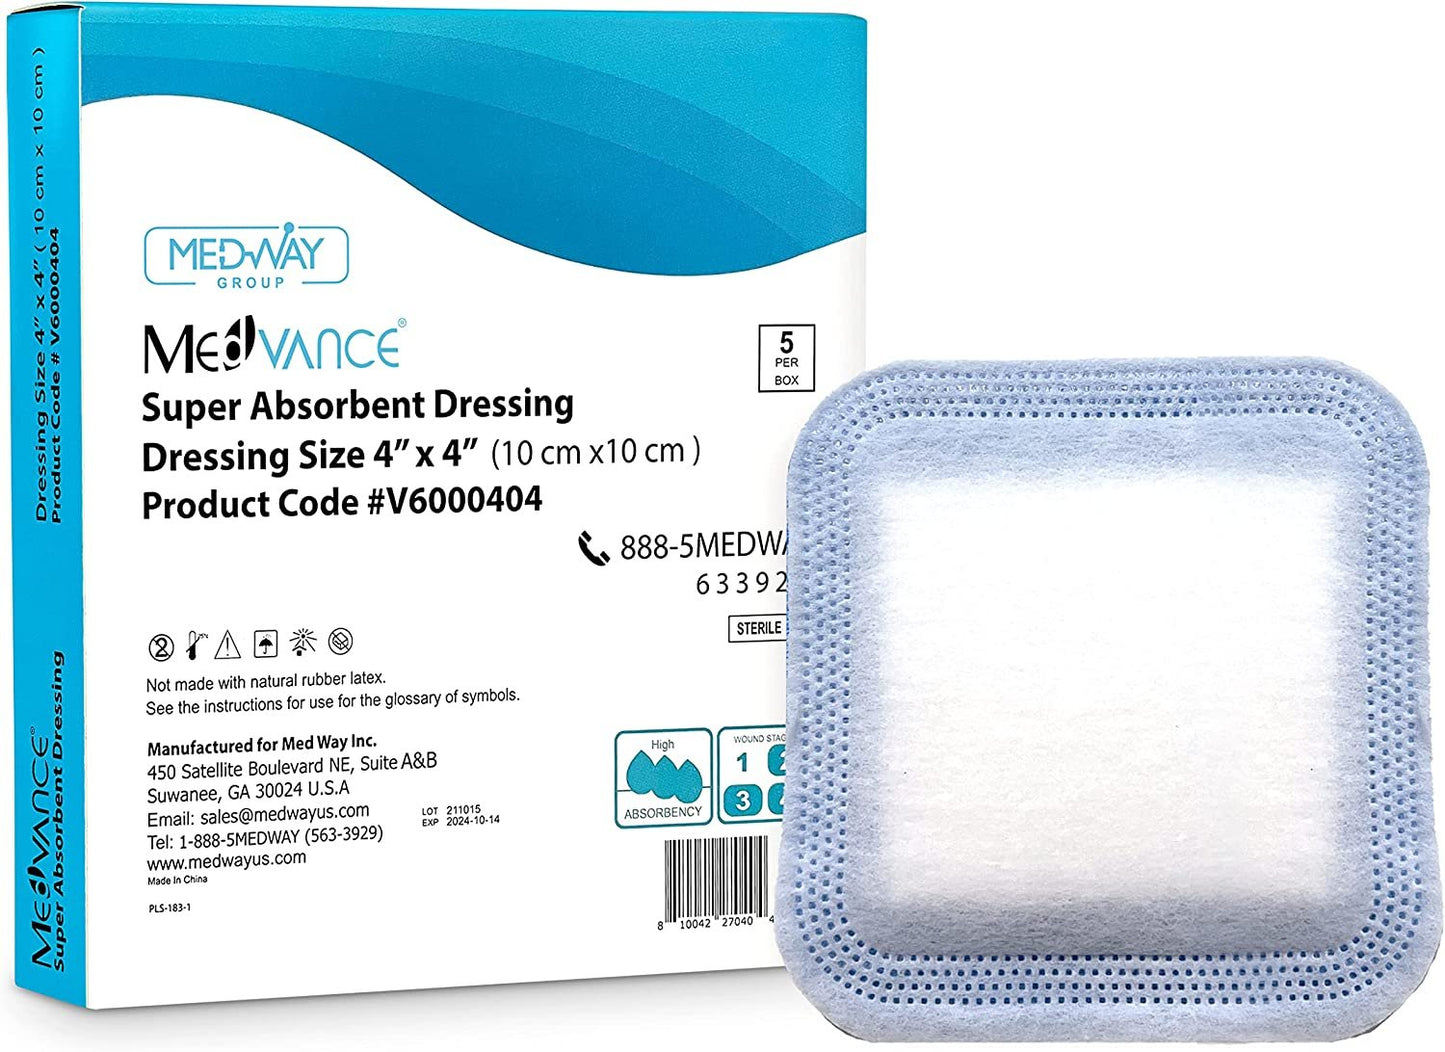 MedVance Super Absorbent Non-Adhesive Wound Dressing, 4"x4", Single Piece